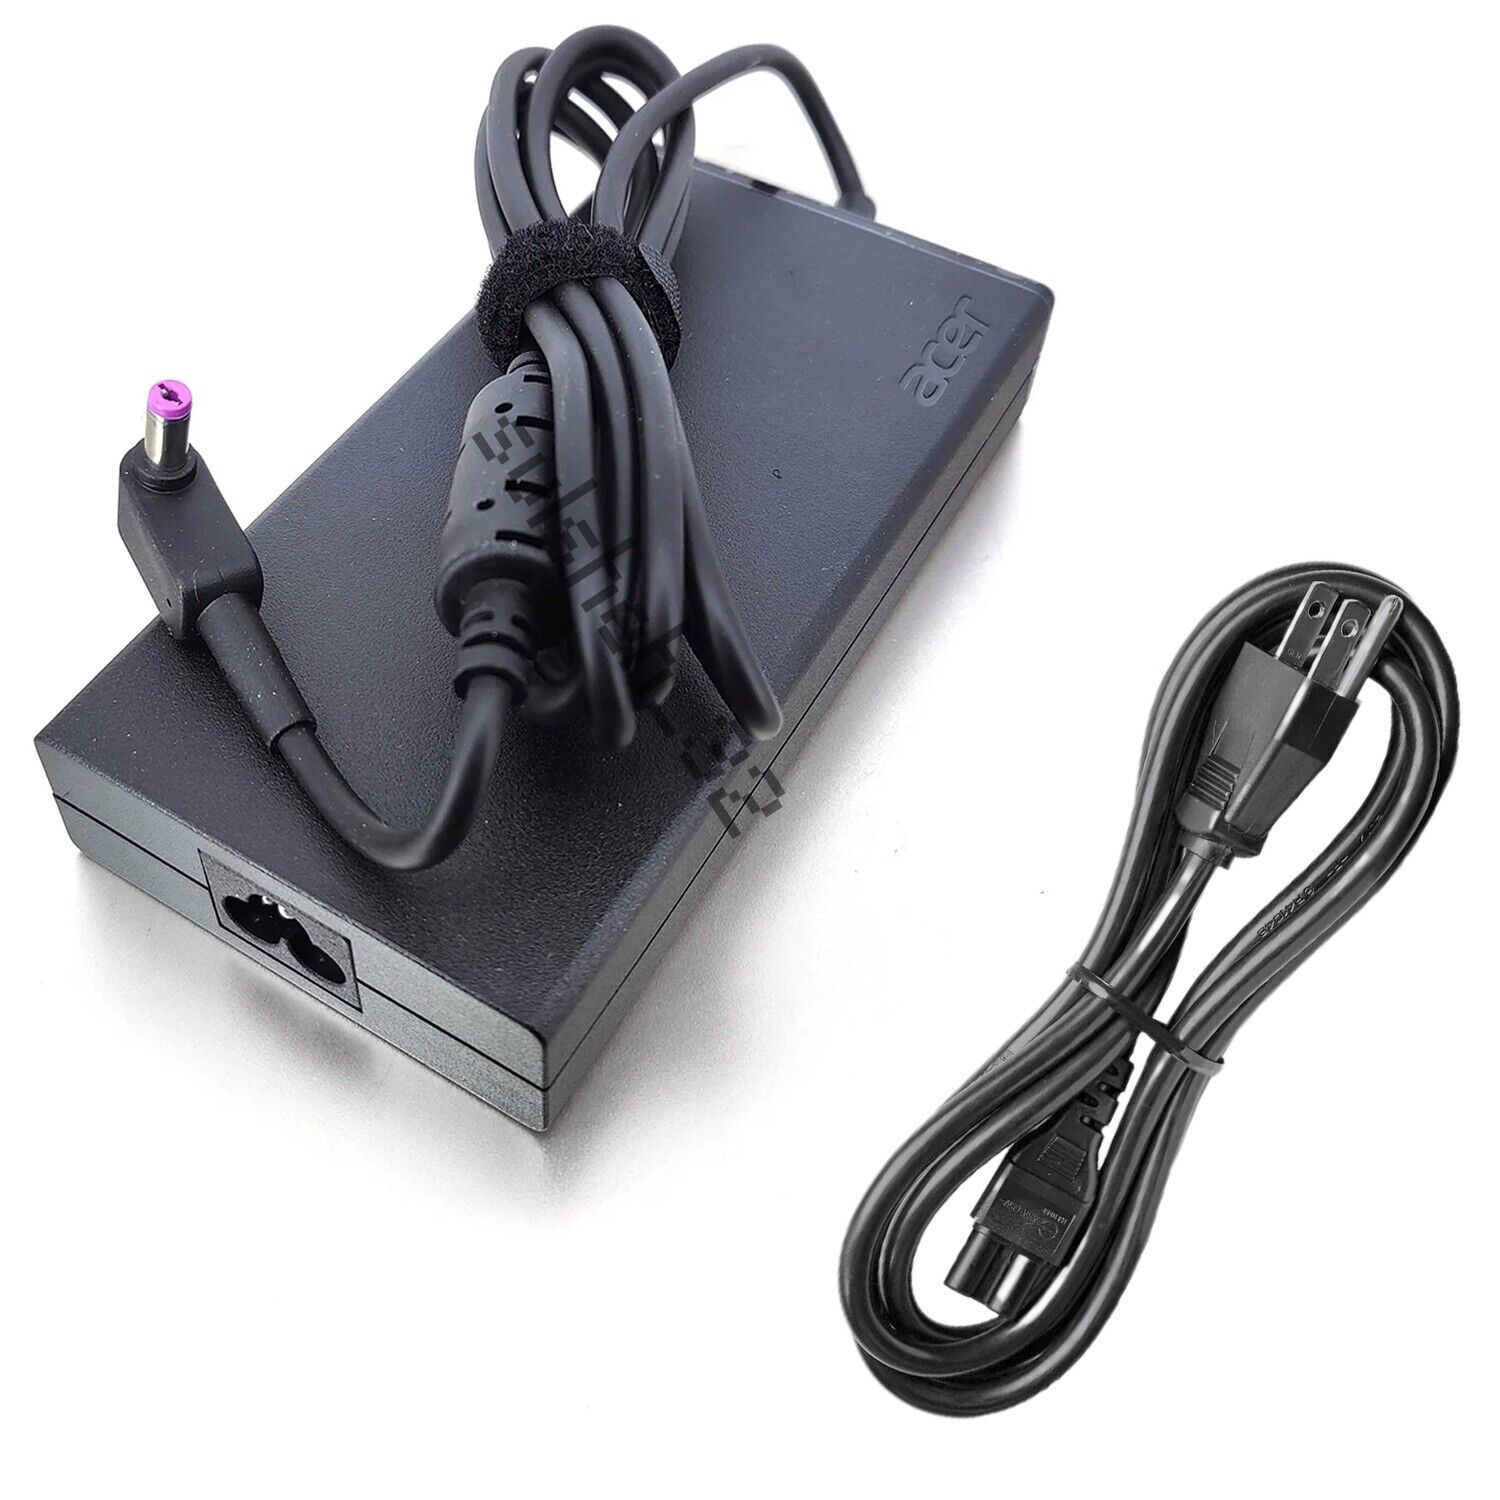 Genuine Acer 135W AC Adapter Charger ADP-135KB Acer Nitro 5 AN515-44 19V 7.1A